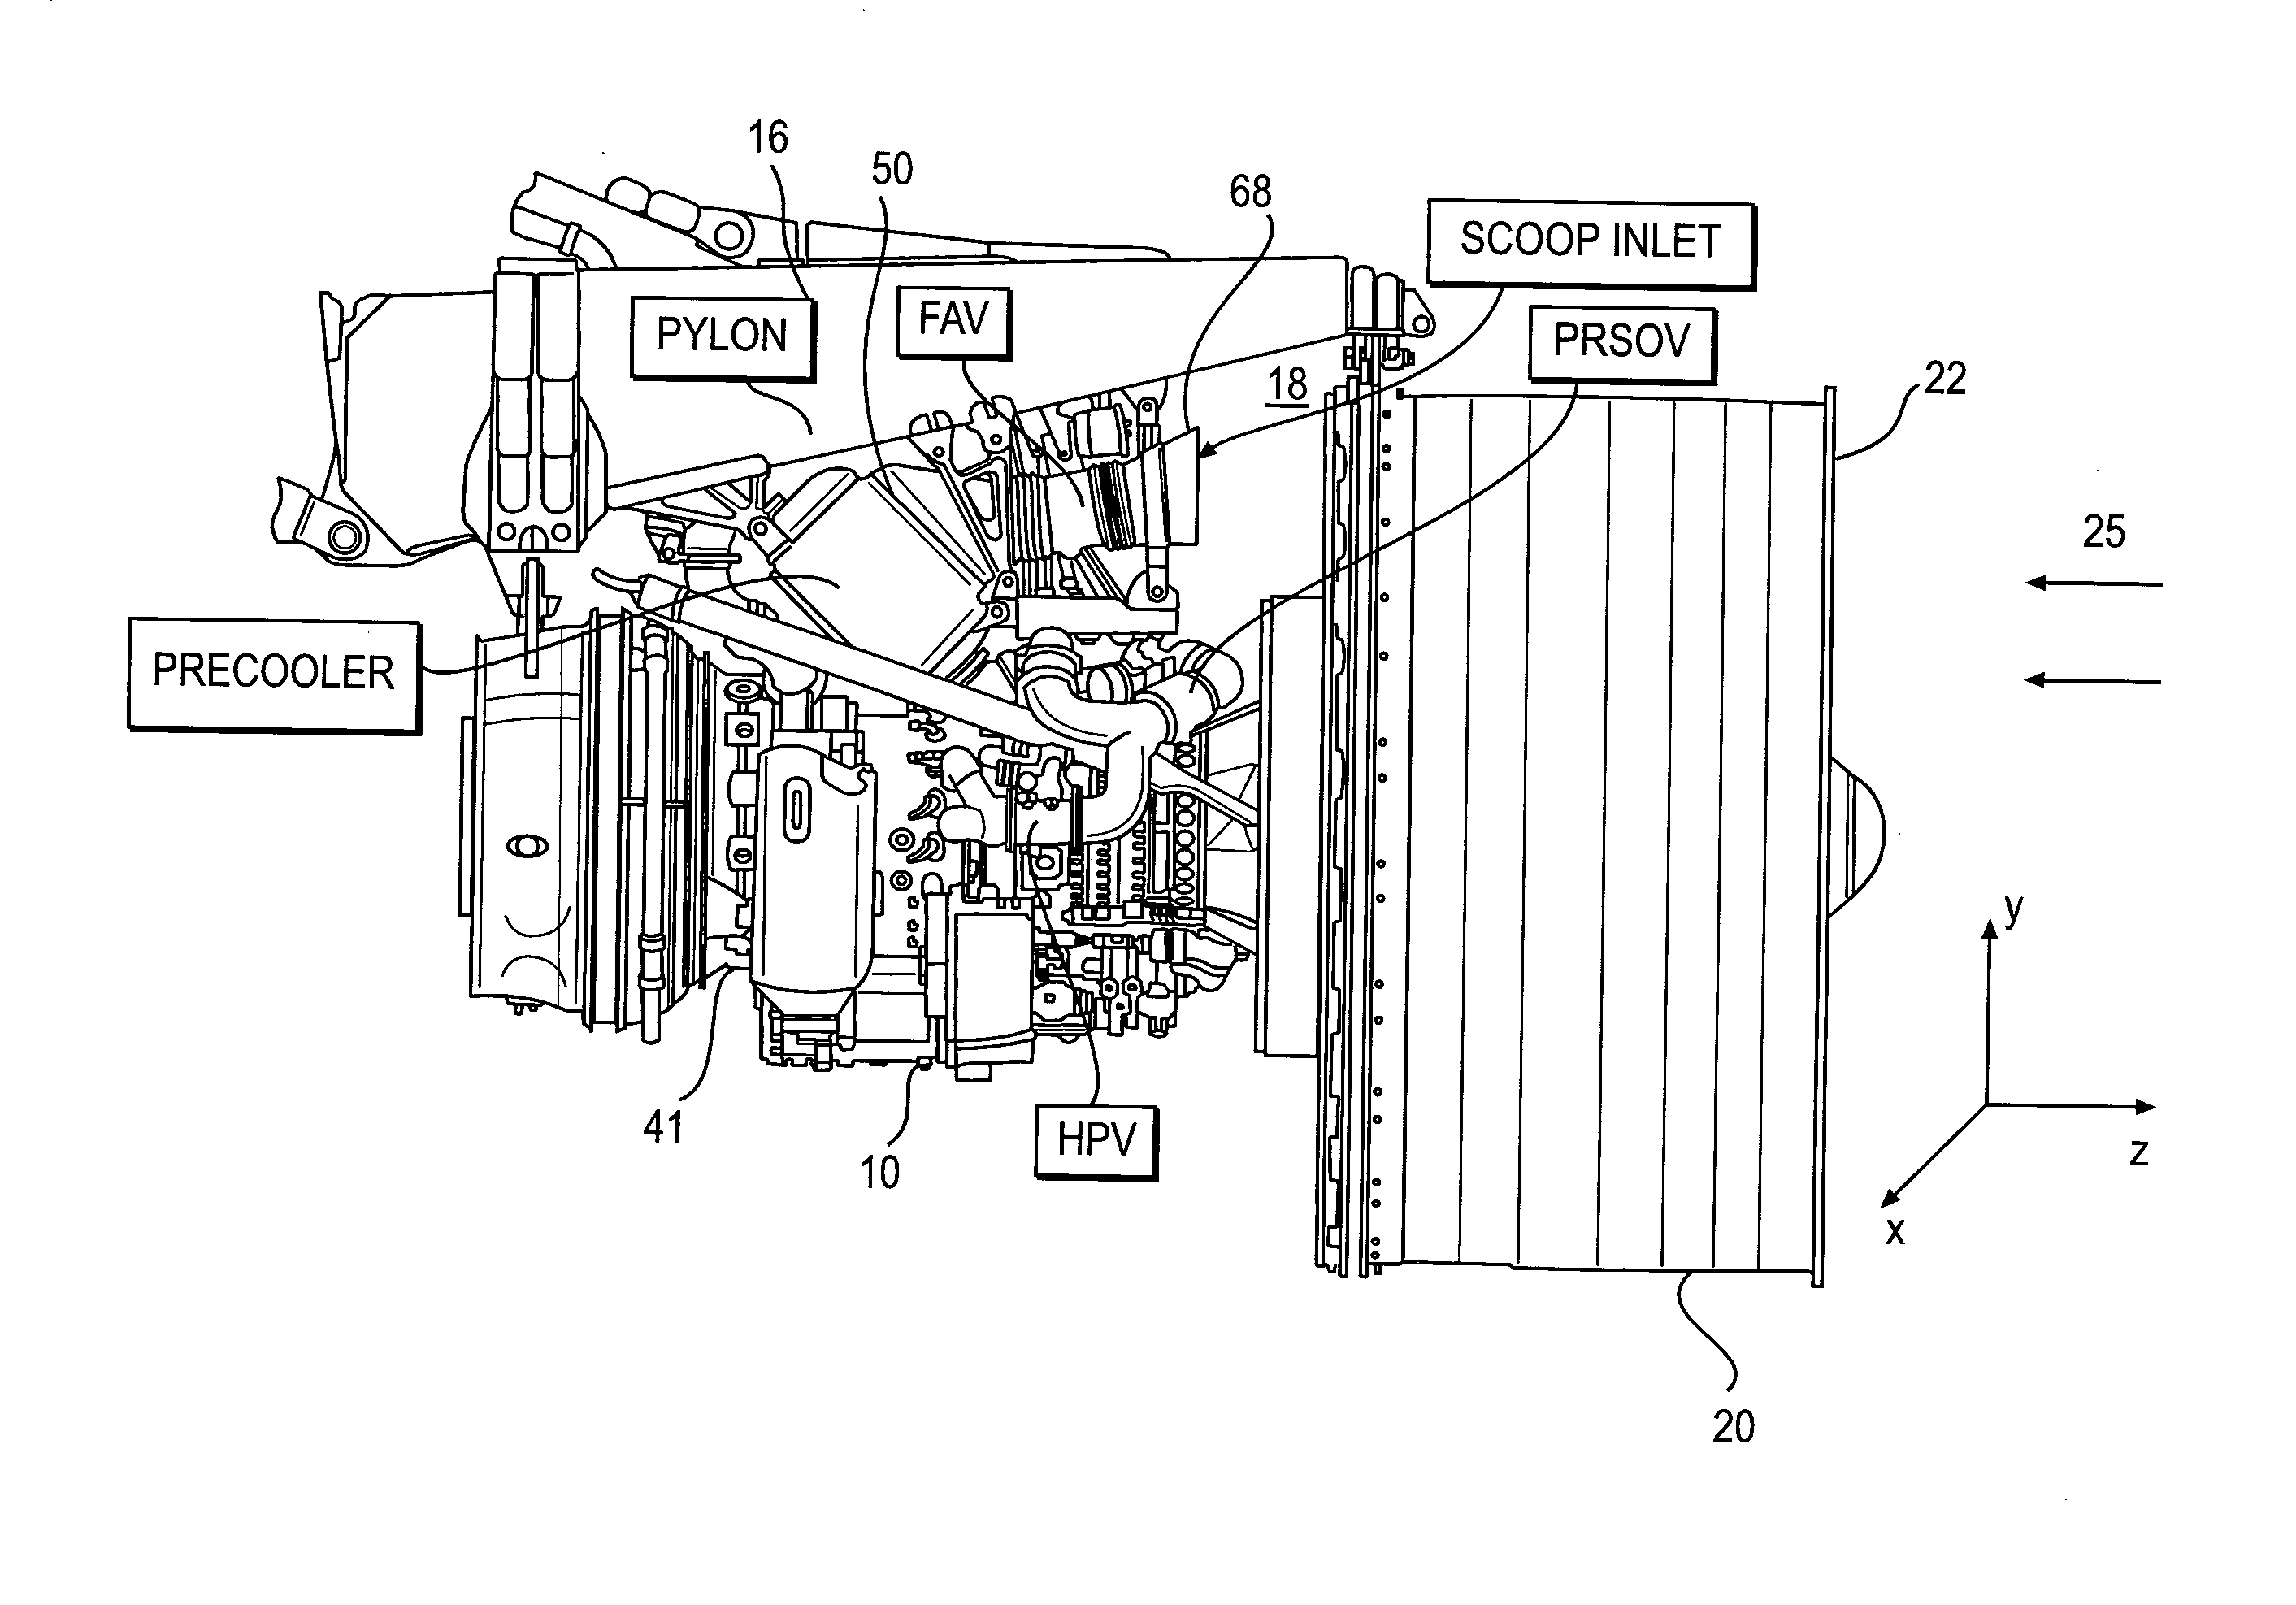 Apparatus for protecting aircraft components against foreign object damage